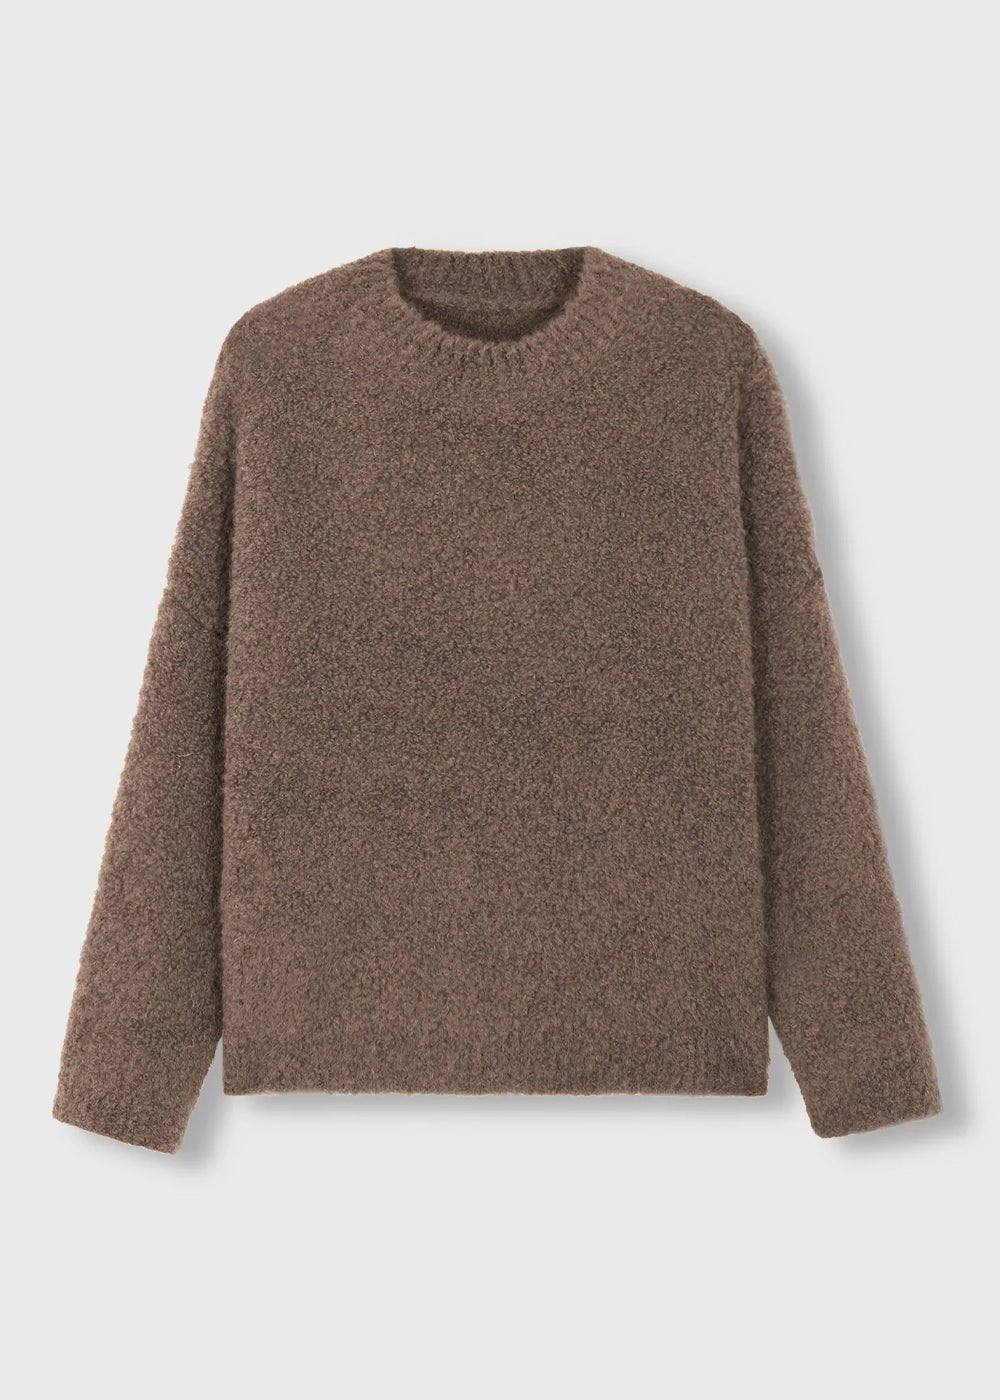 Cordera Vetiver Bouclé Sweater - New Classics Studios Sustainable Ethical Fashion Canada